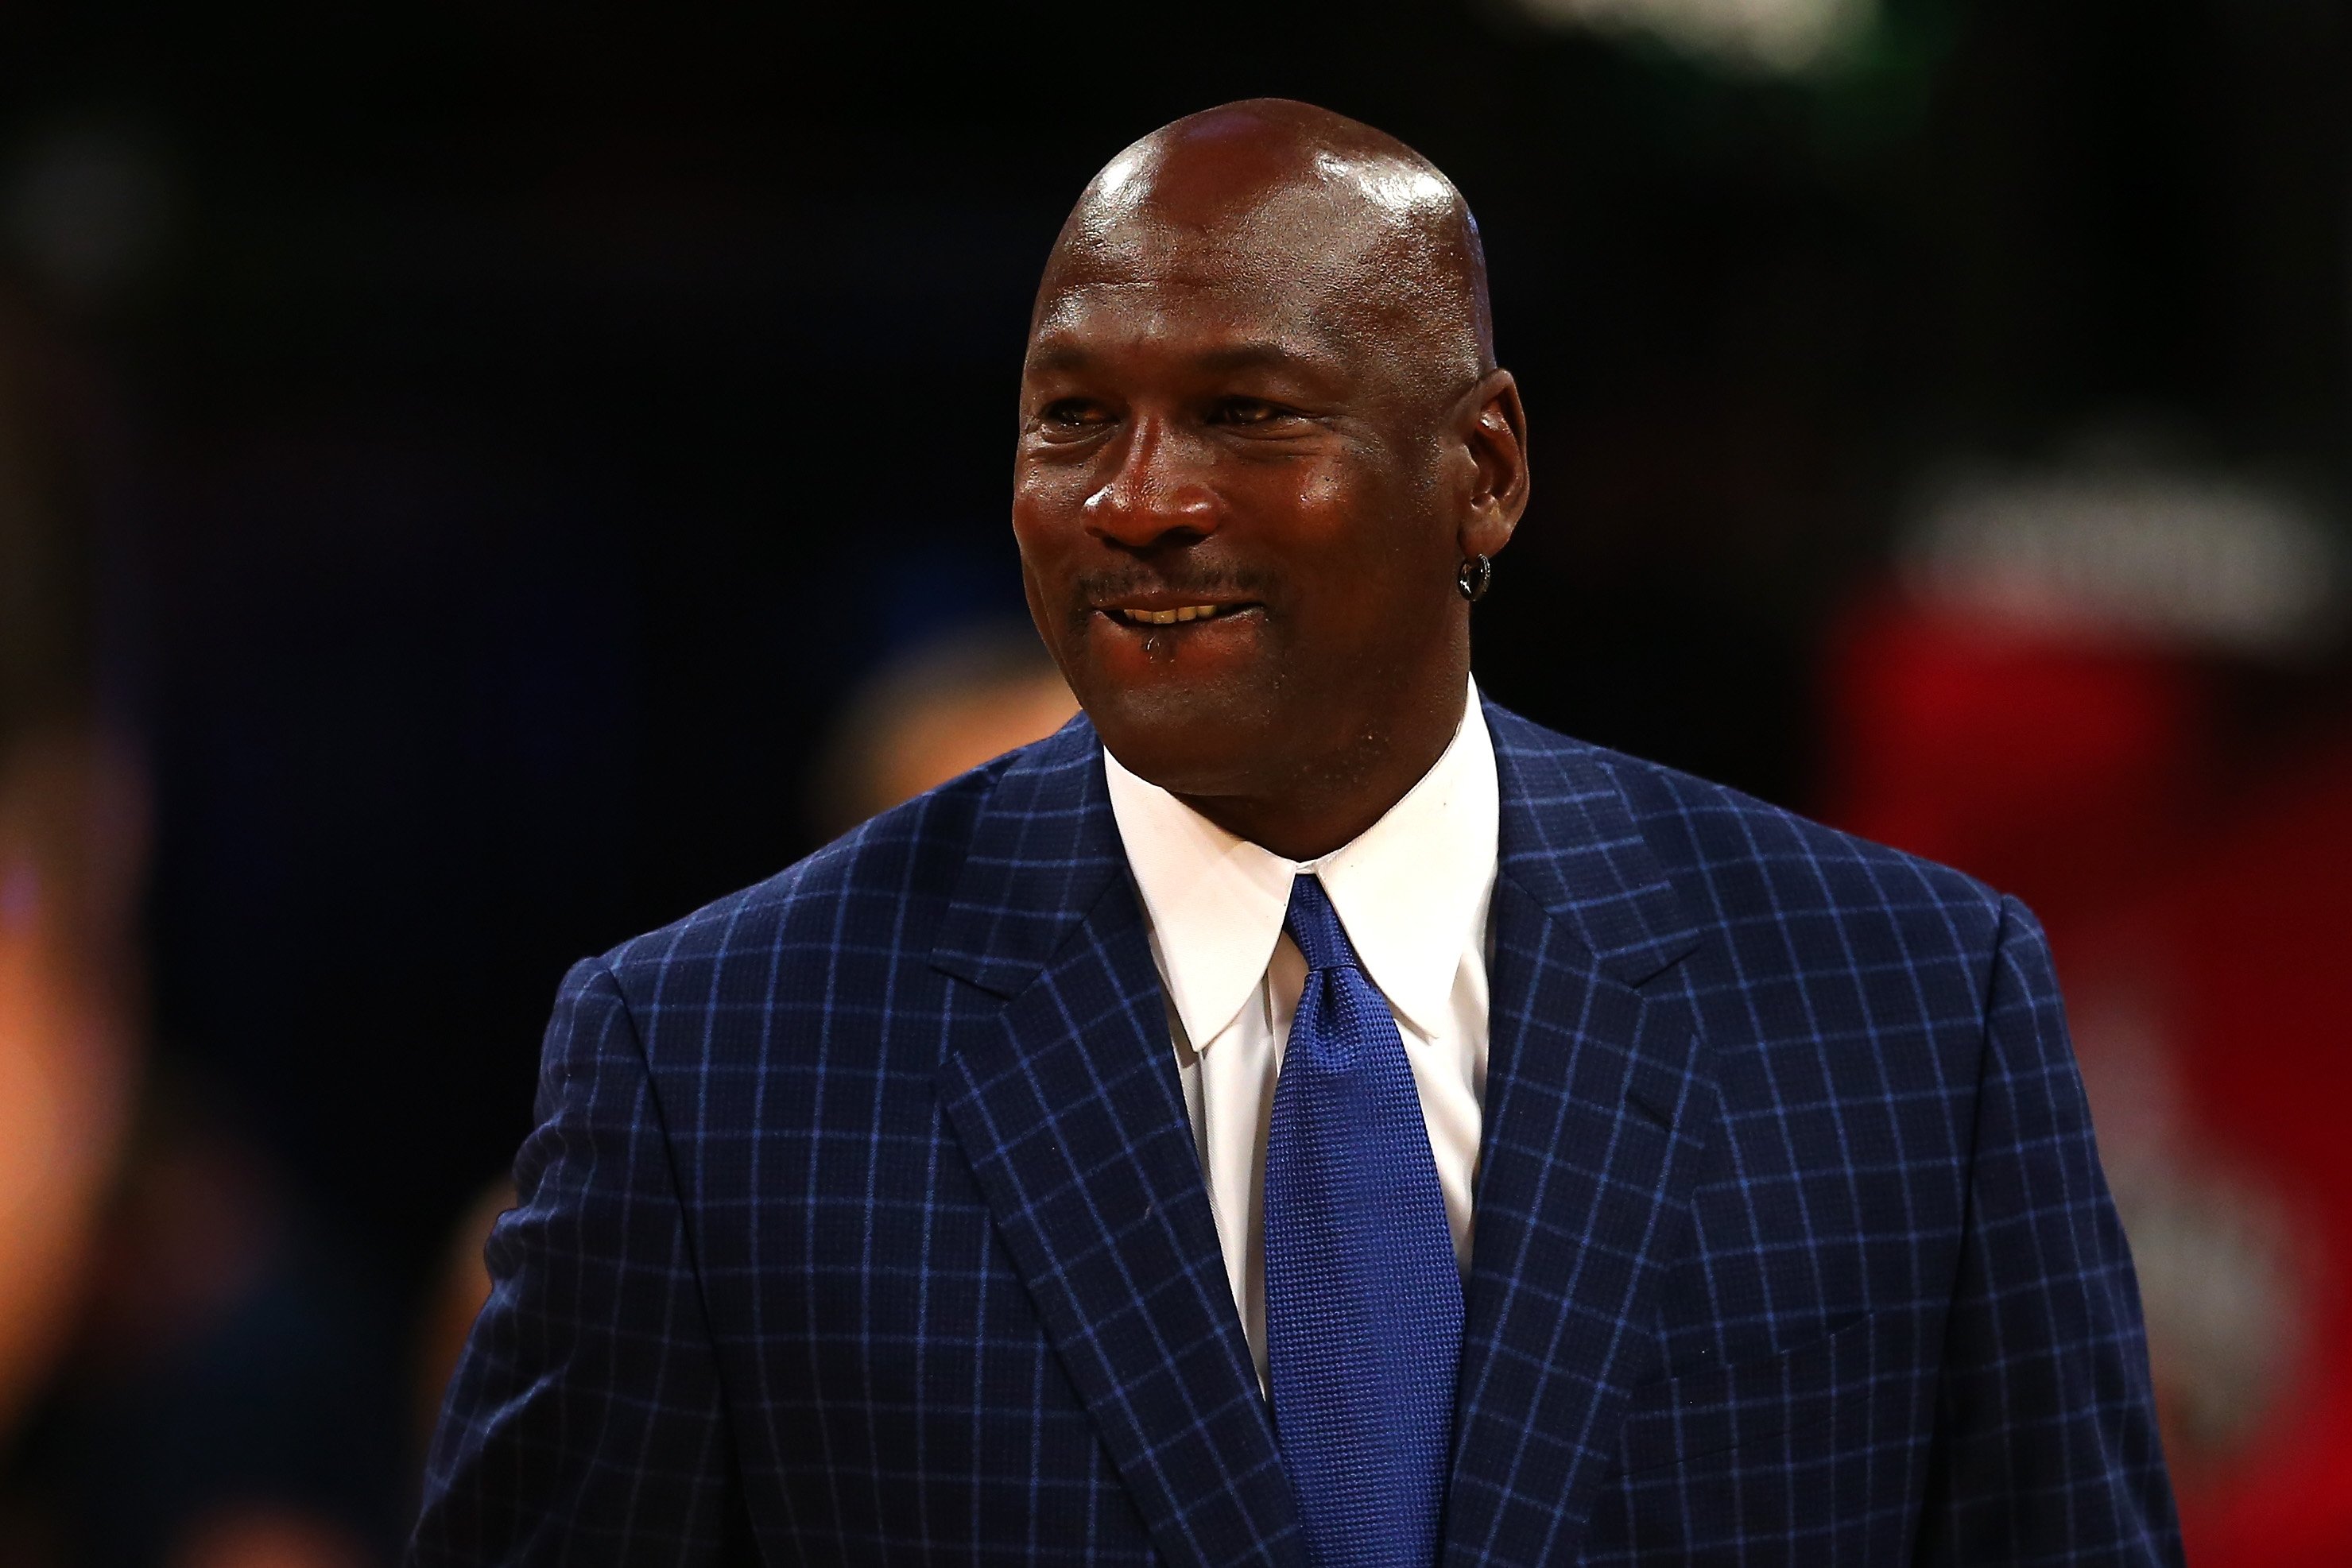 Michael Jordan attending an NBA All-Star Game in 2016. | Photo: Getty Images